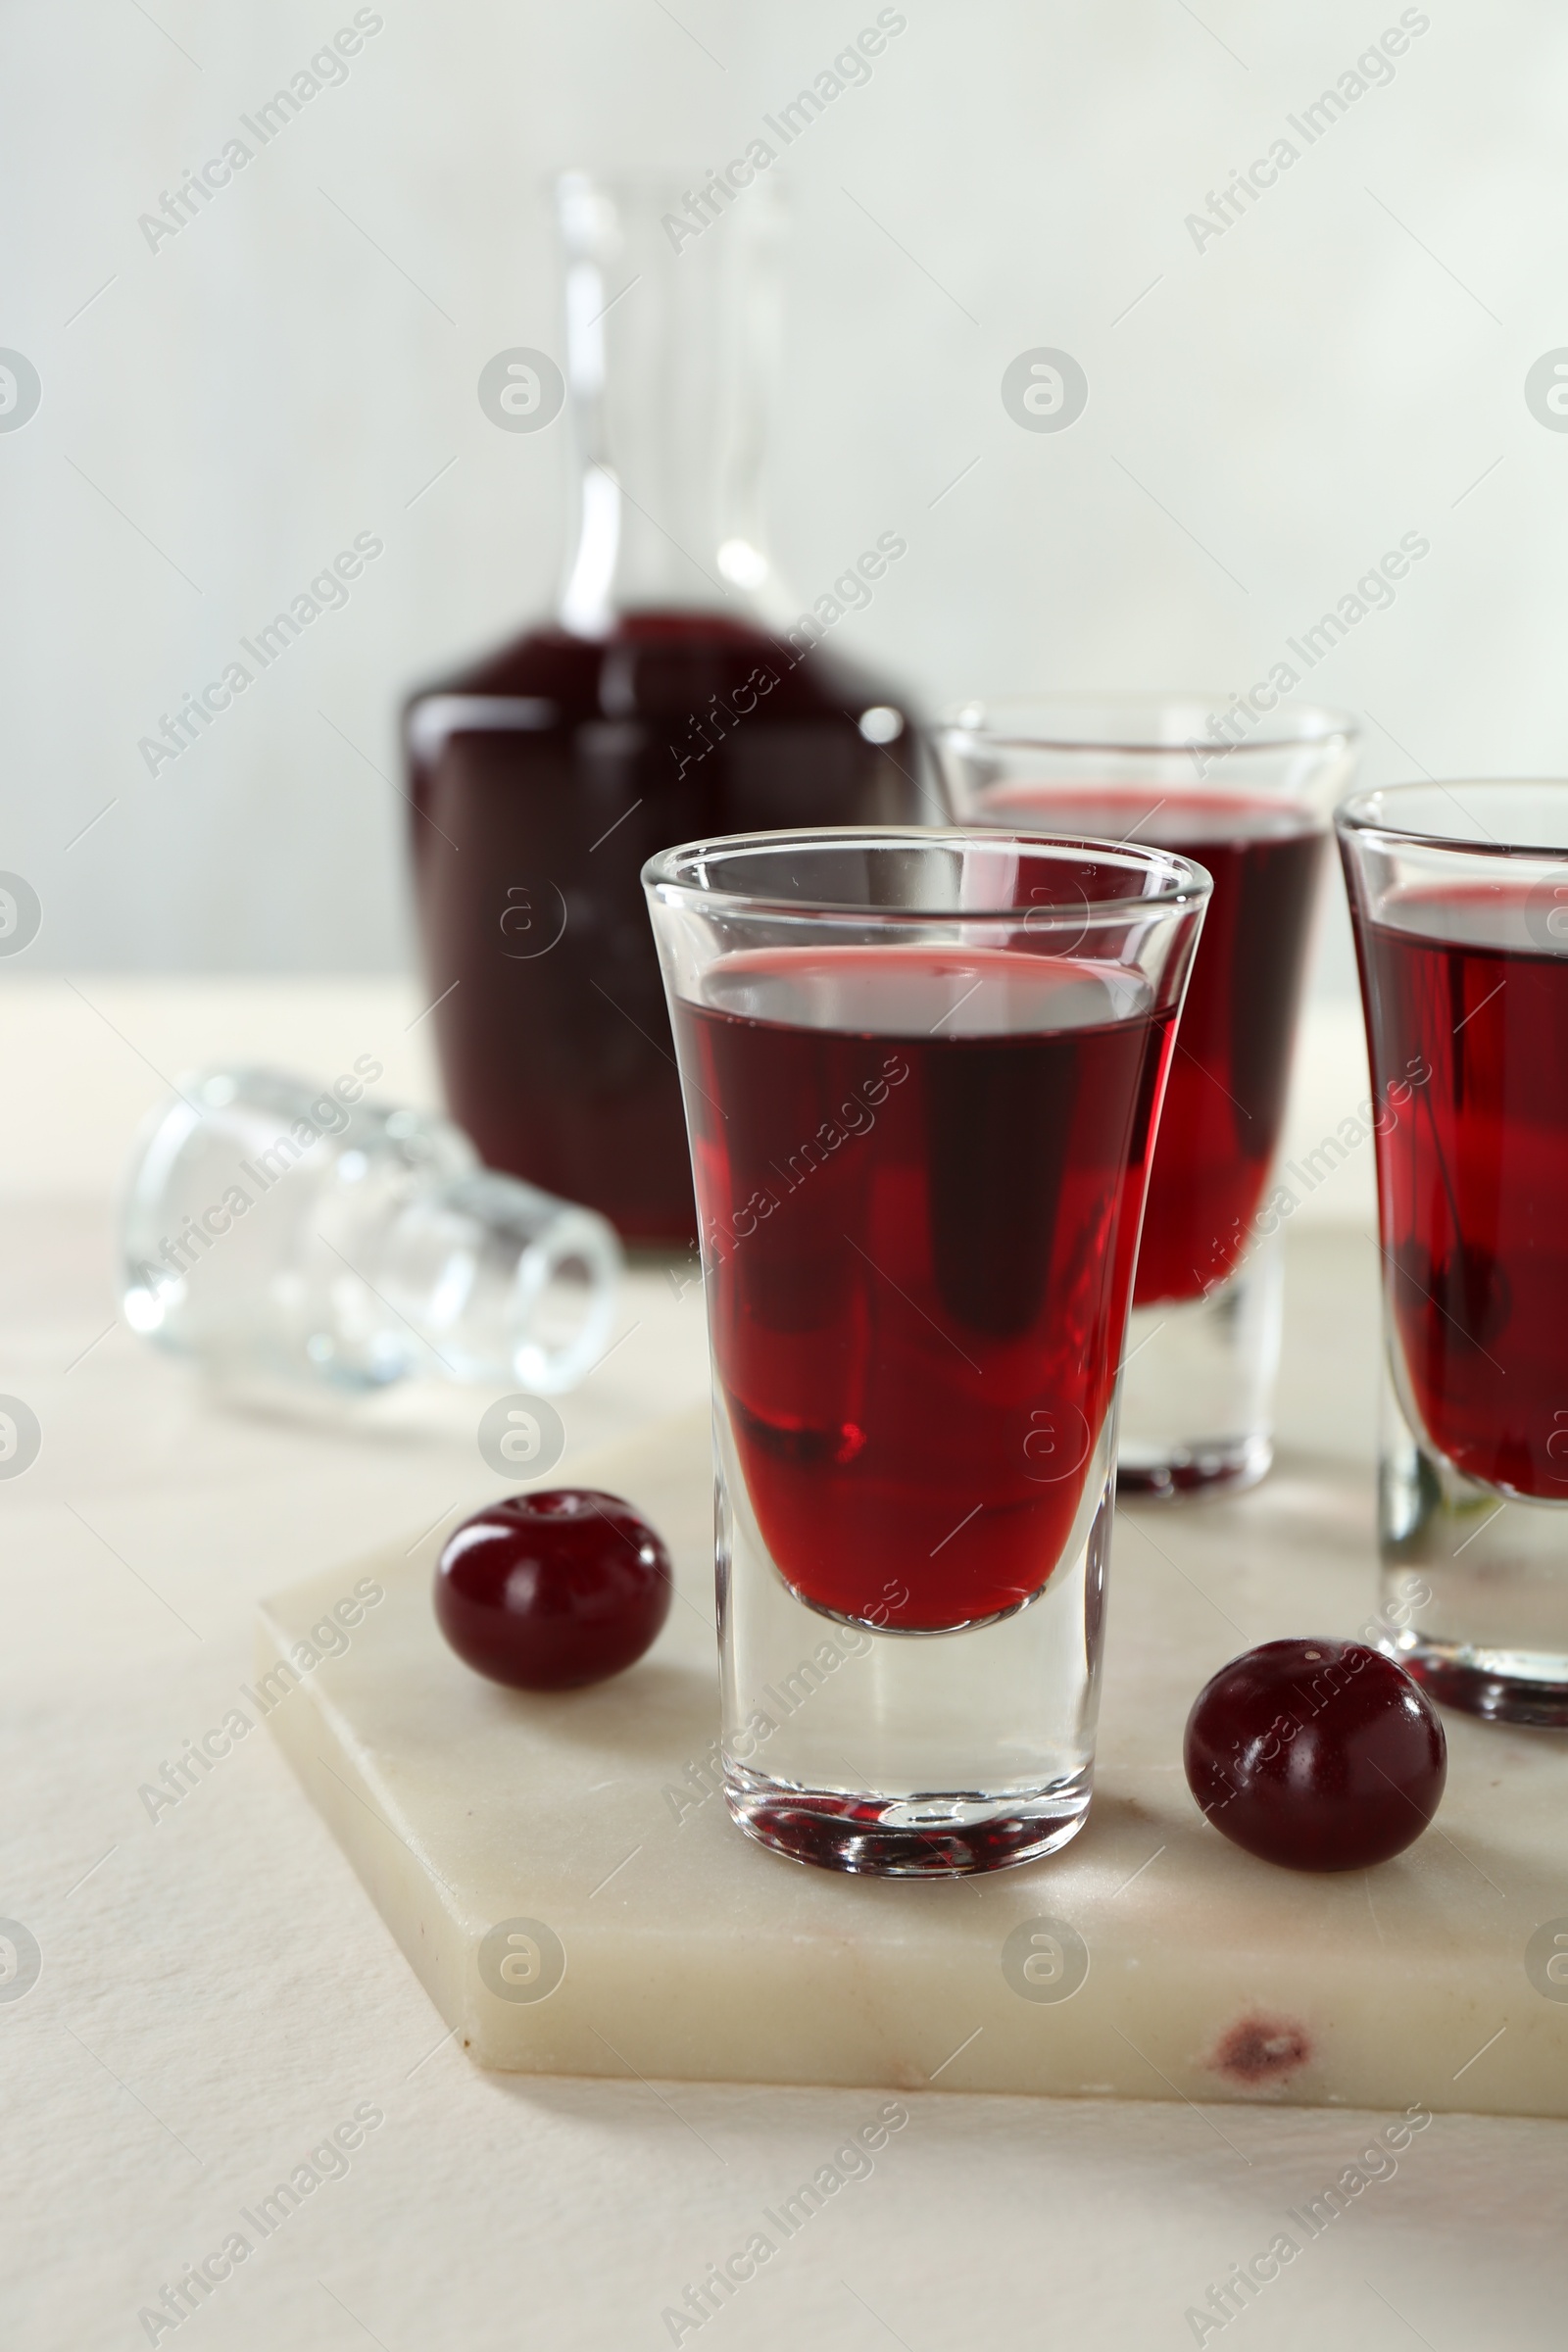 Photo of Delicious cherry liqueur and berries on white table